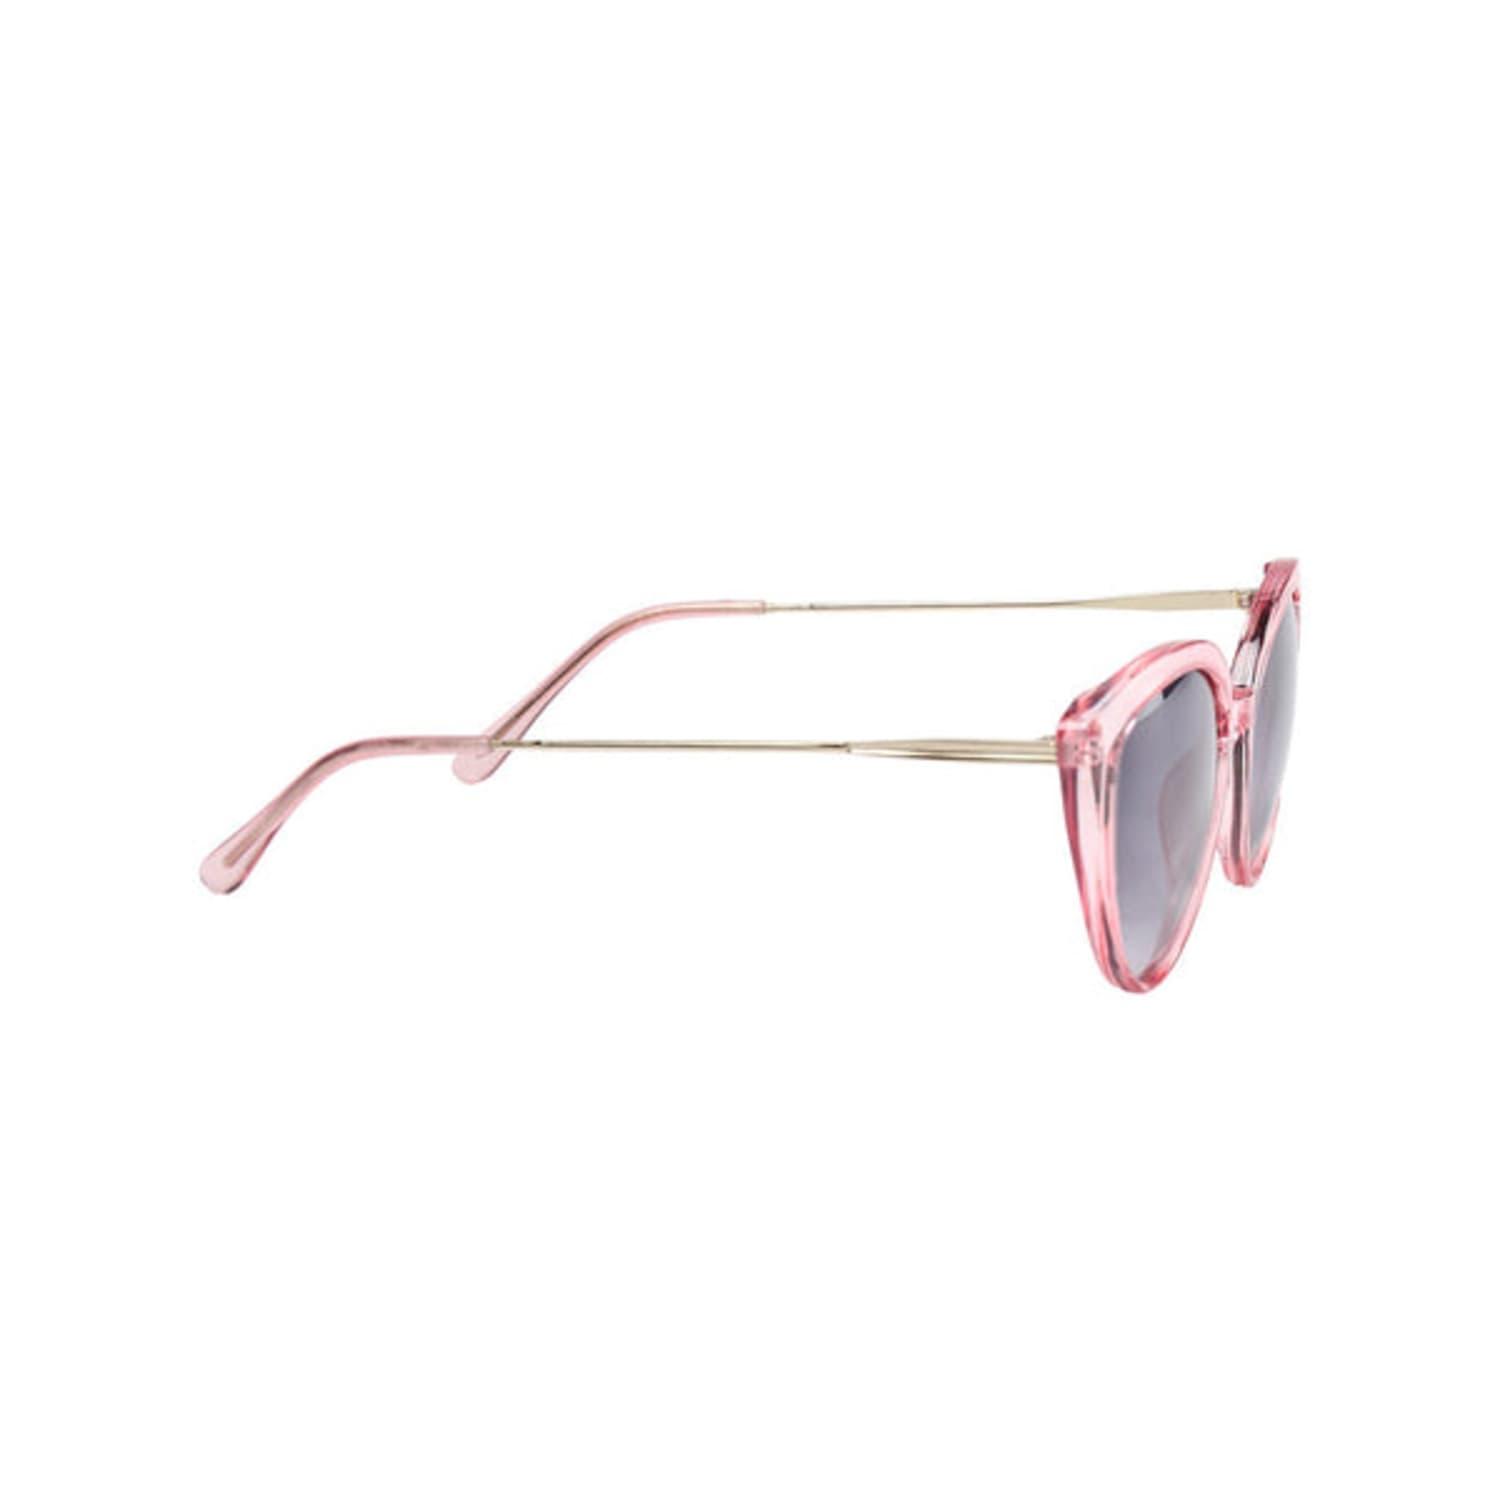 Numph Nuelsly Sunglasses- Ash Rose in Purple for Men | Lyst